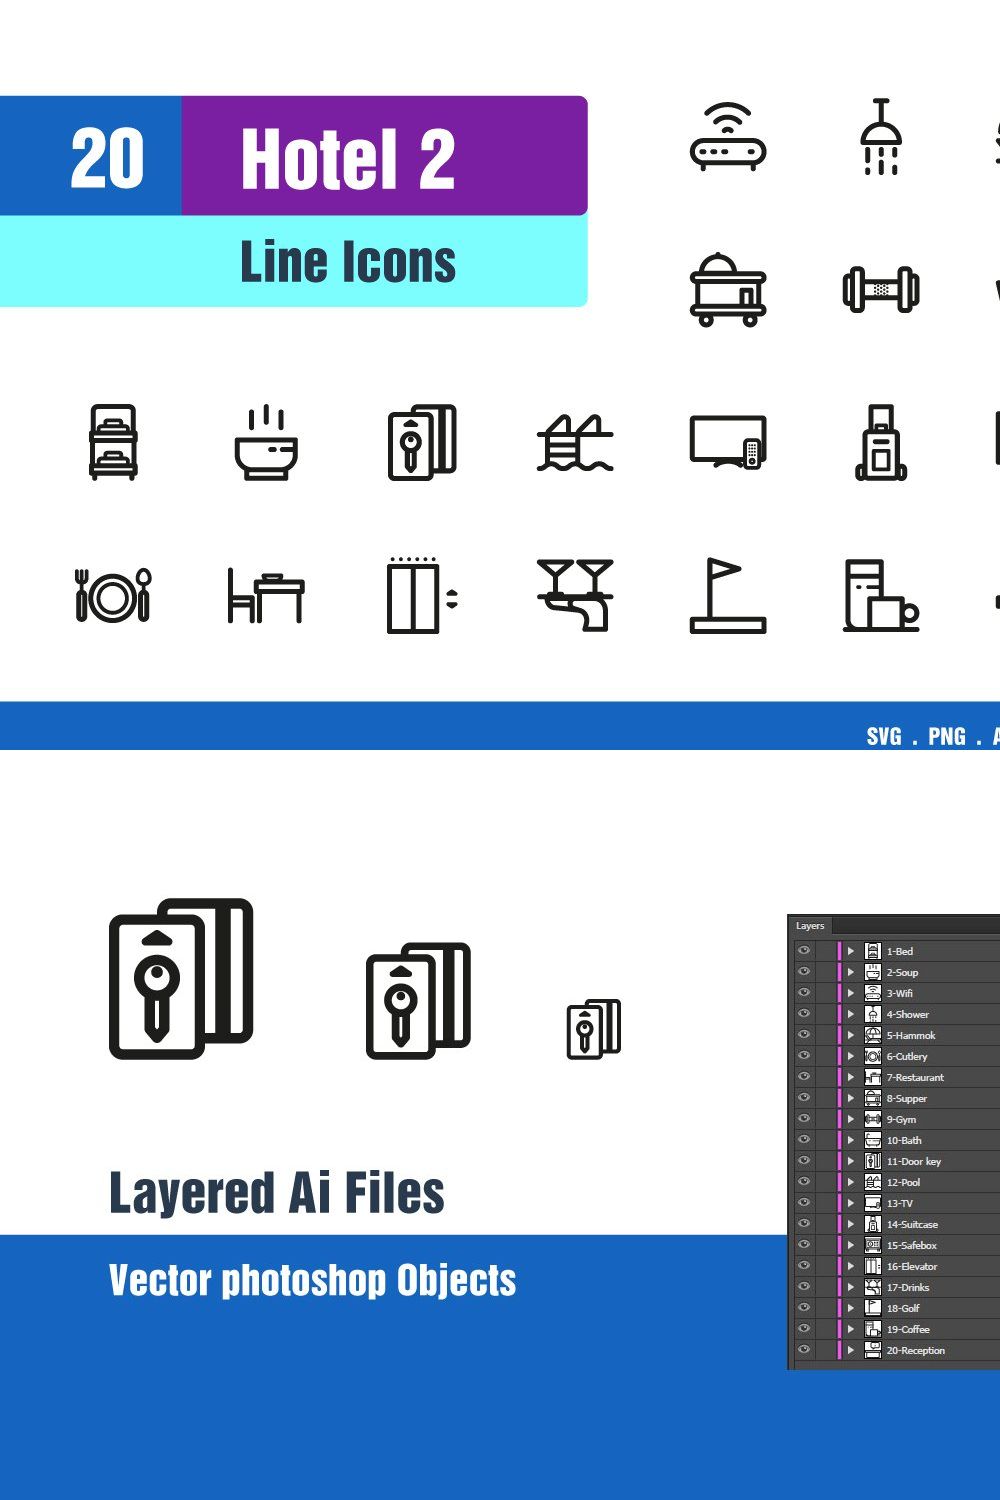 Hotel Icons #2 pinterest preview image.